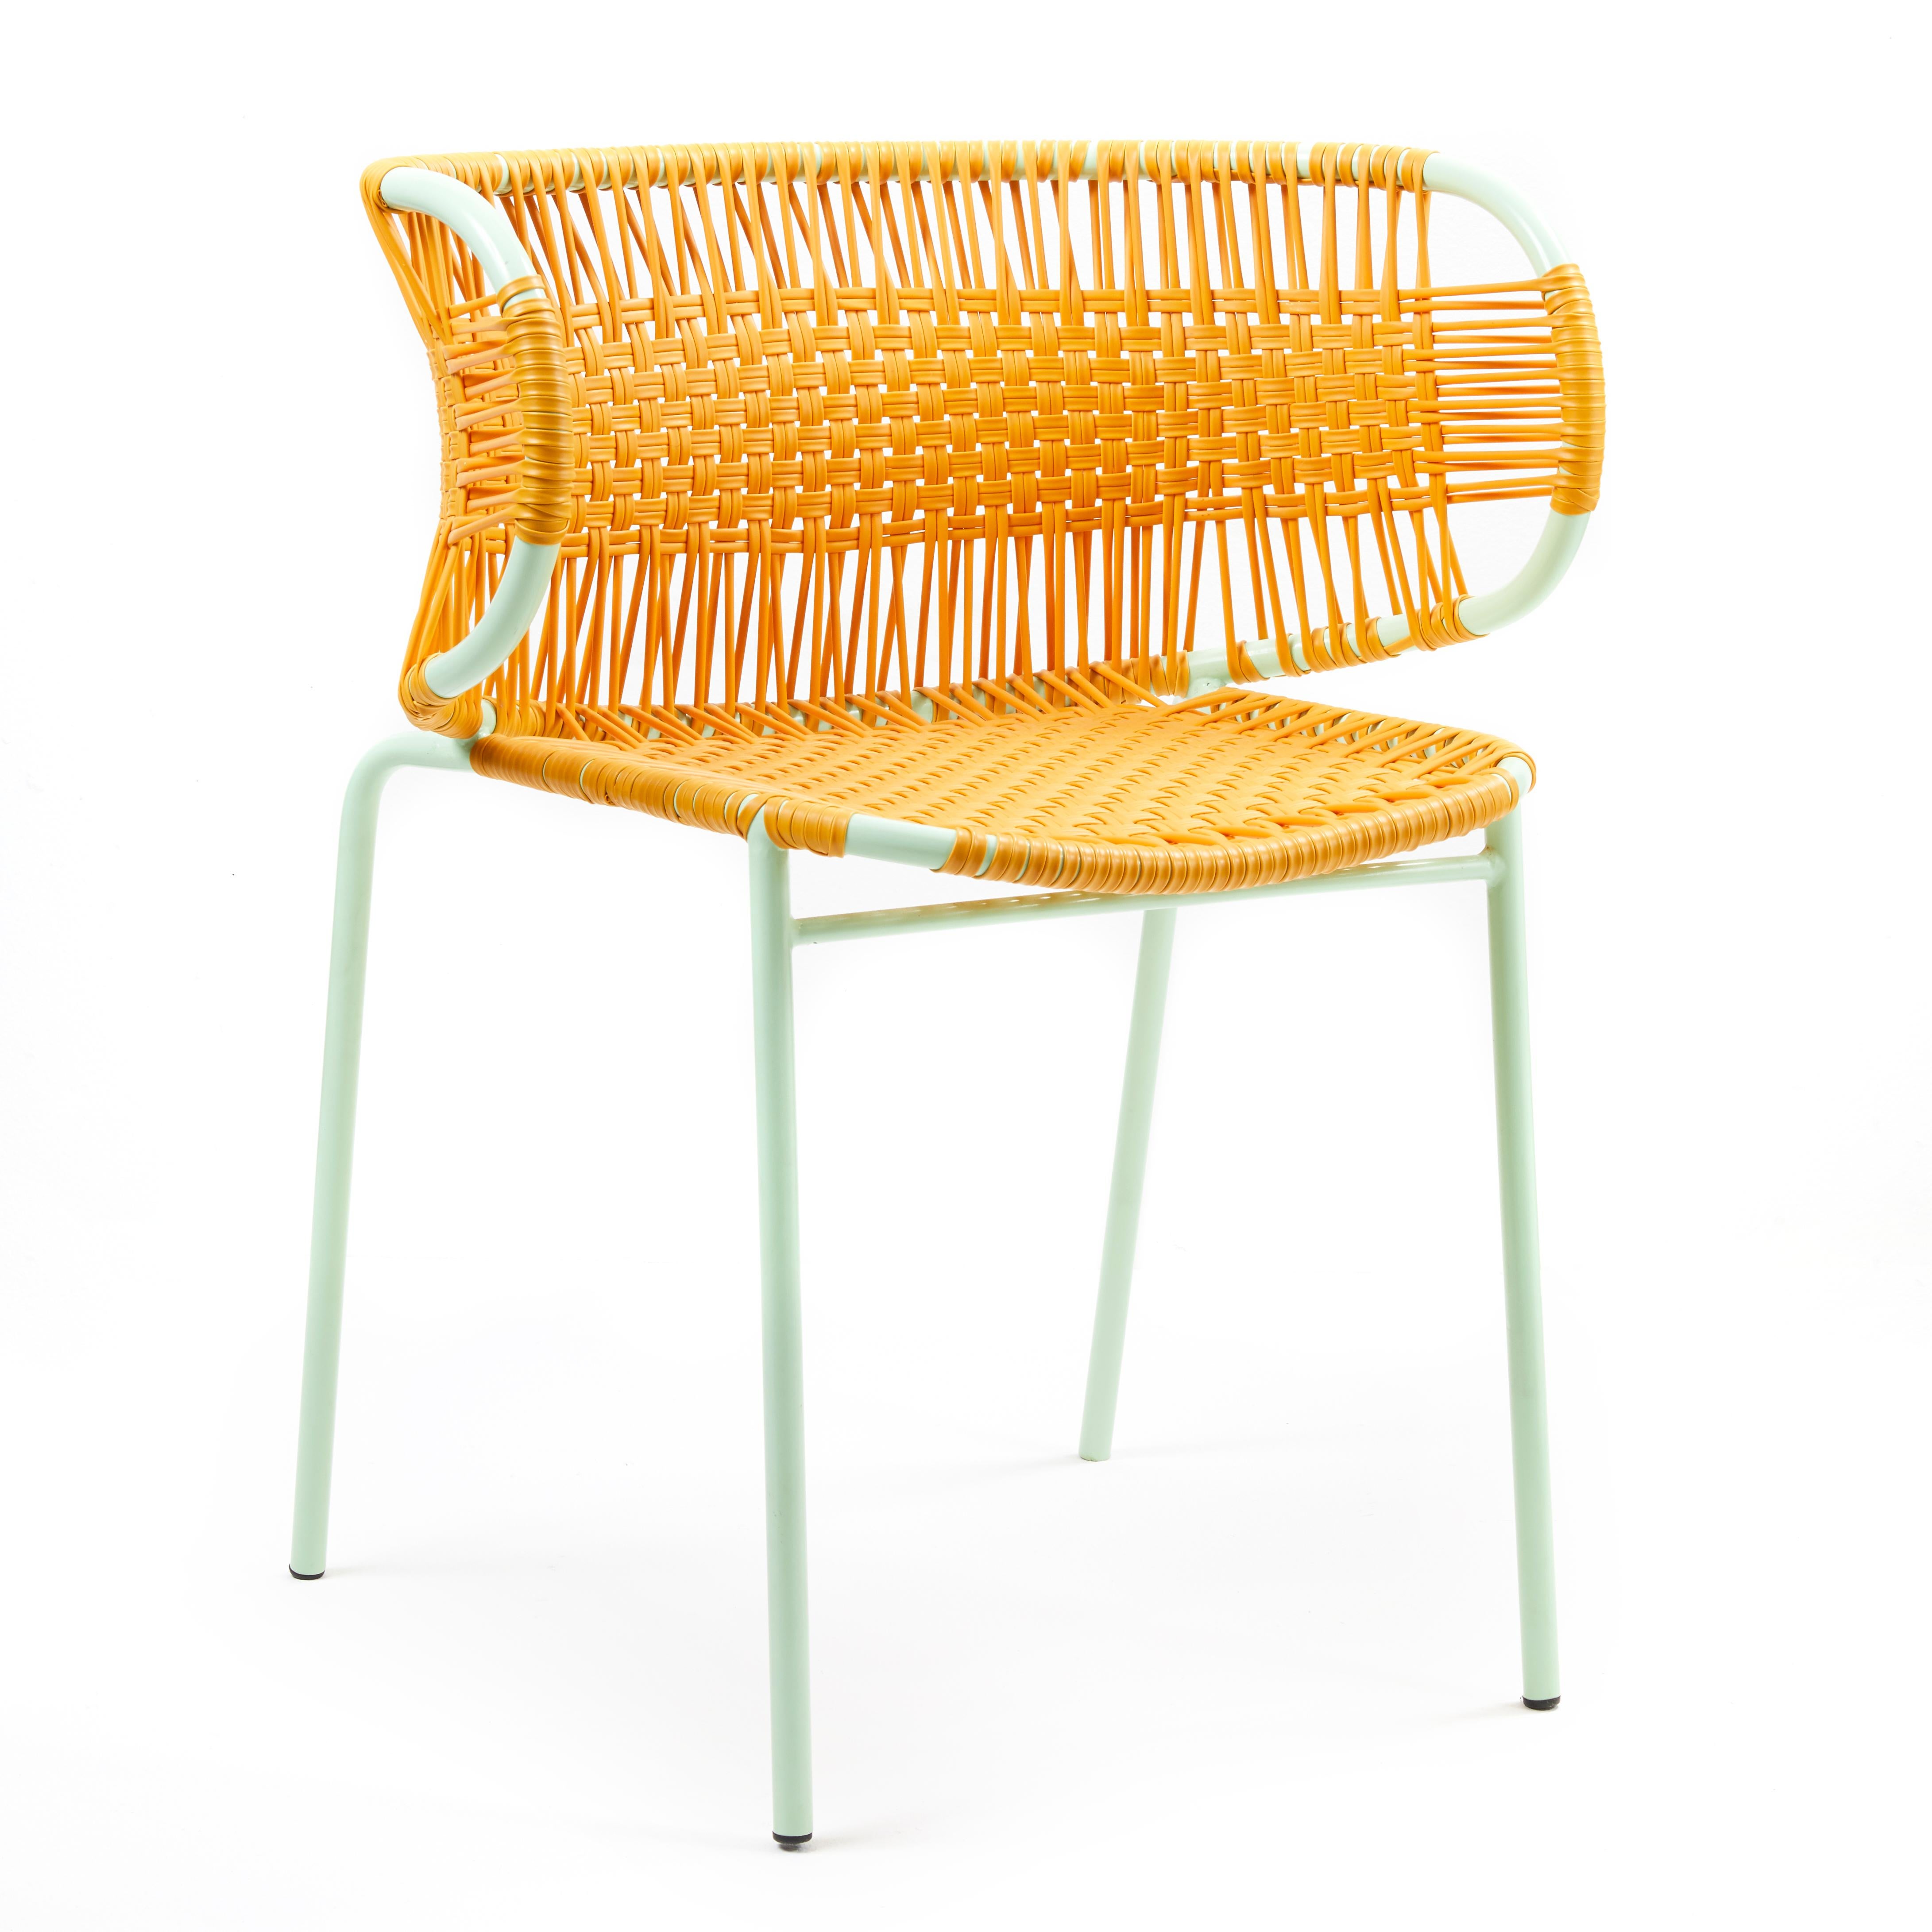 Honey Cielo stacking chair with armrest by Sebastian Herkner
Materials: Galvanized and powder-coated tubular steel. PVC strings are made from recycled plastic.
Technique: Made from recycled plastic and weaved by local craftspeople in Cartagena,